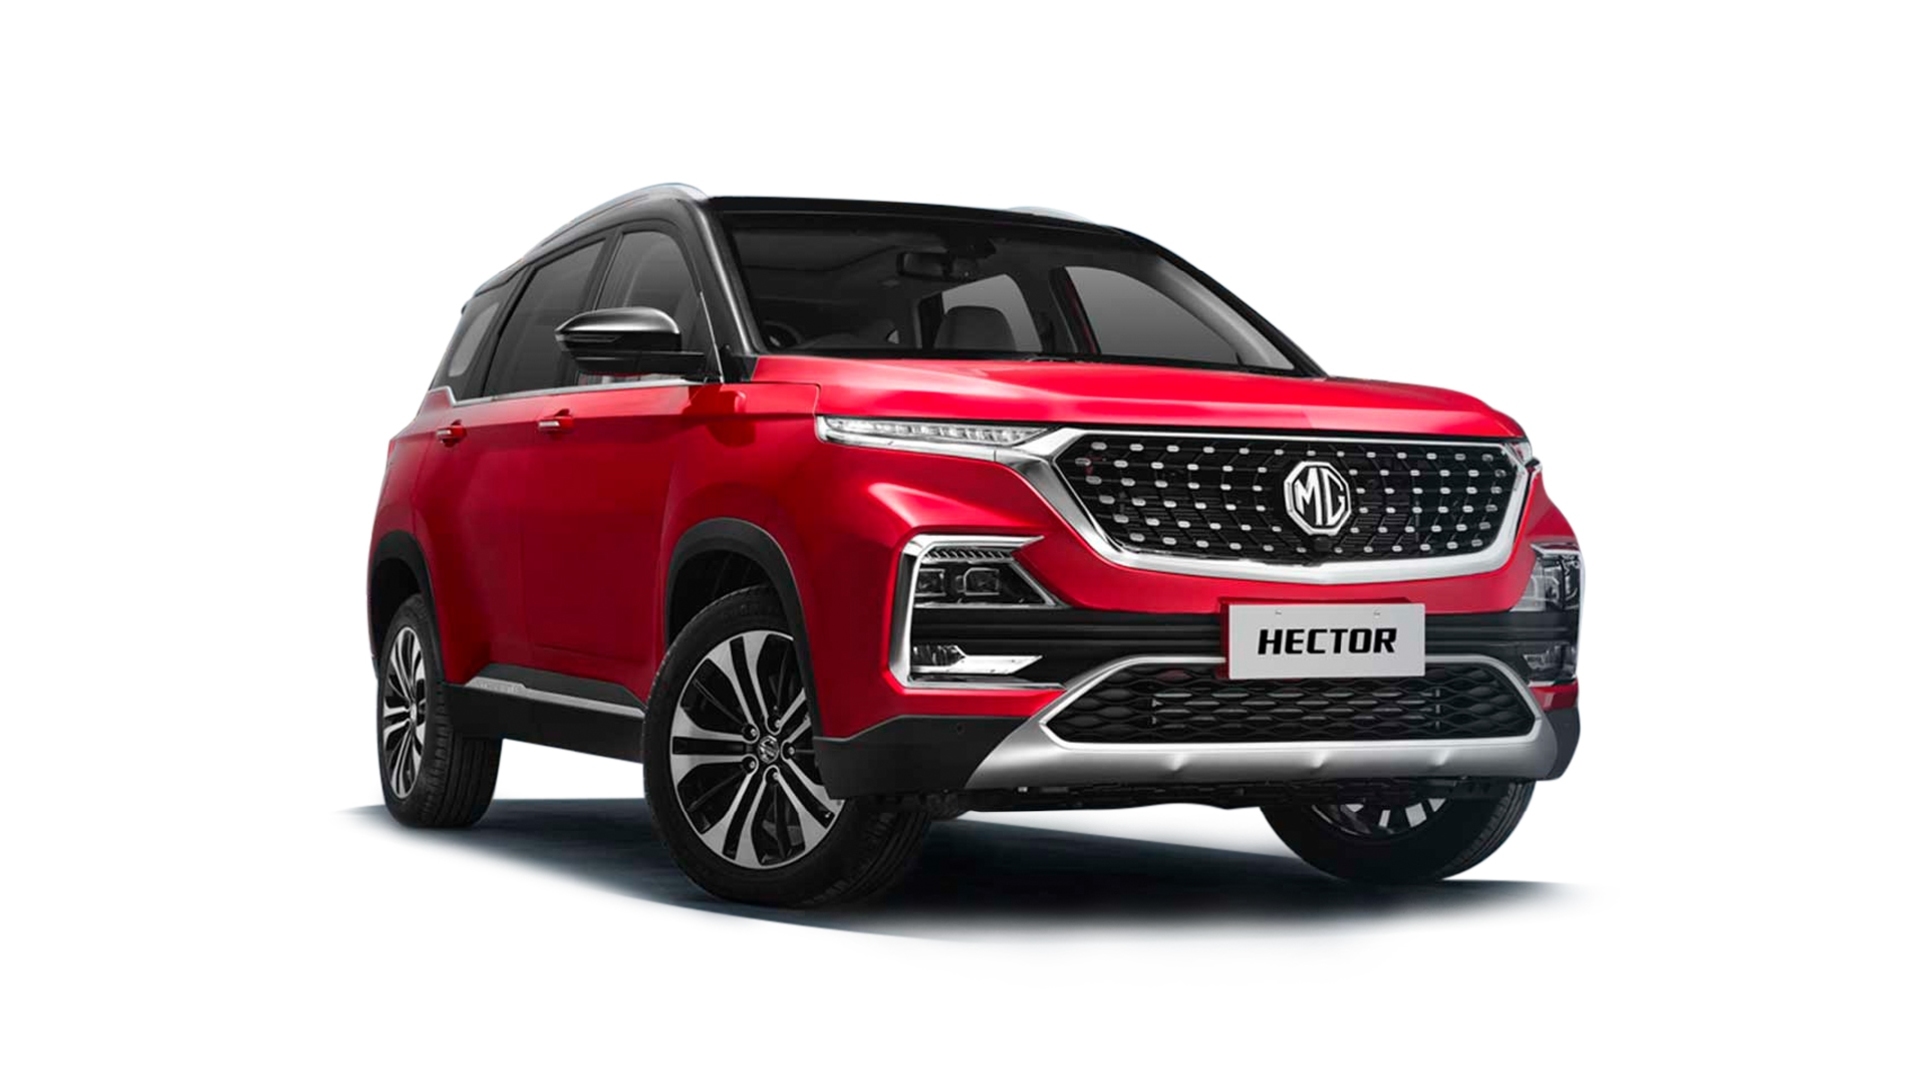 MG Hector Image & Exterior Photo Gallery [Images]